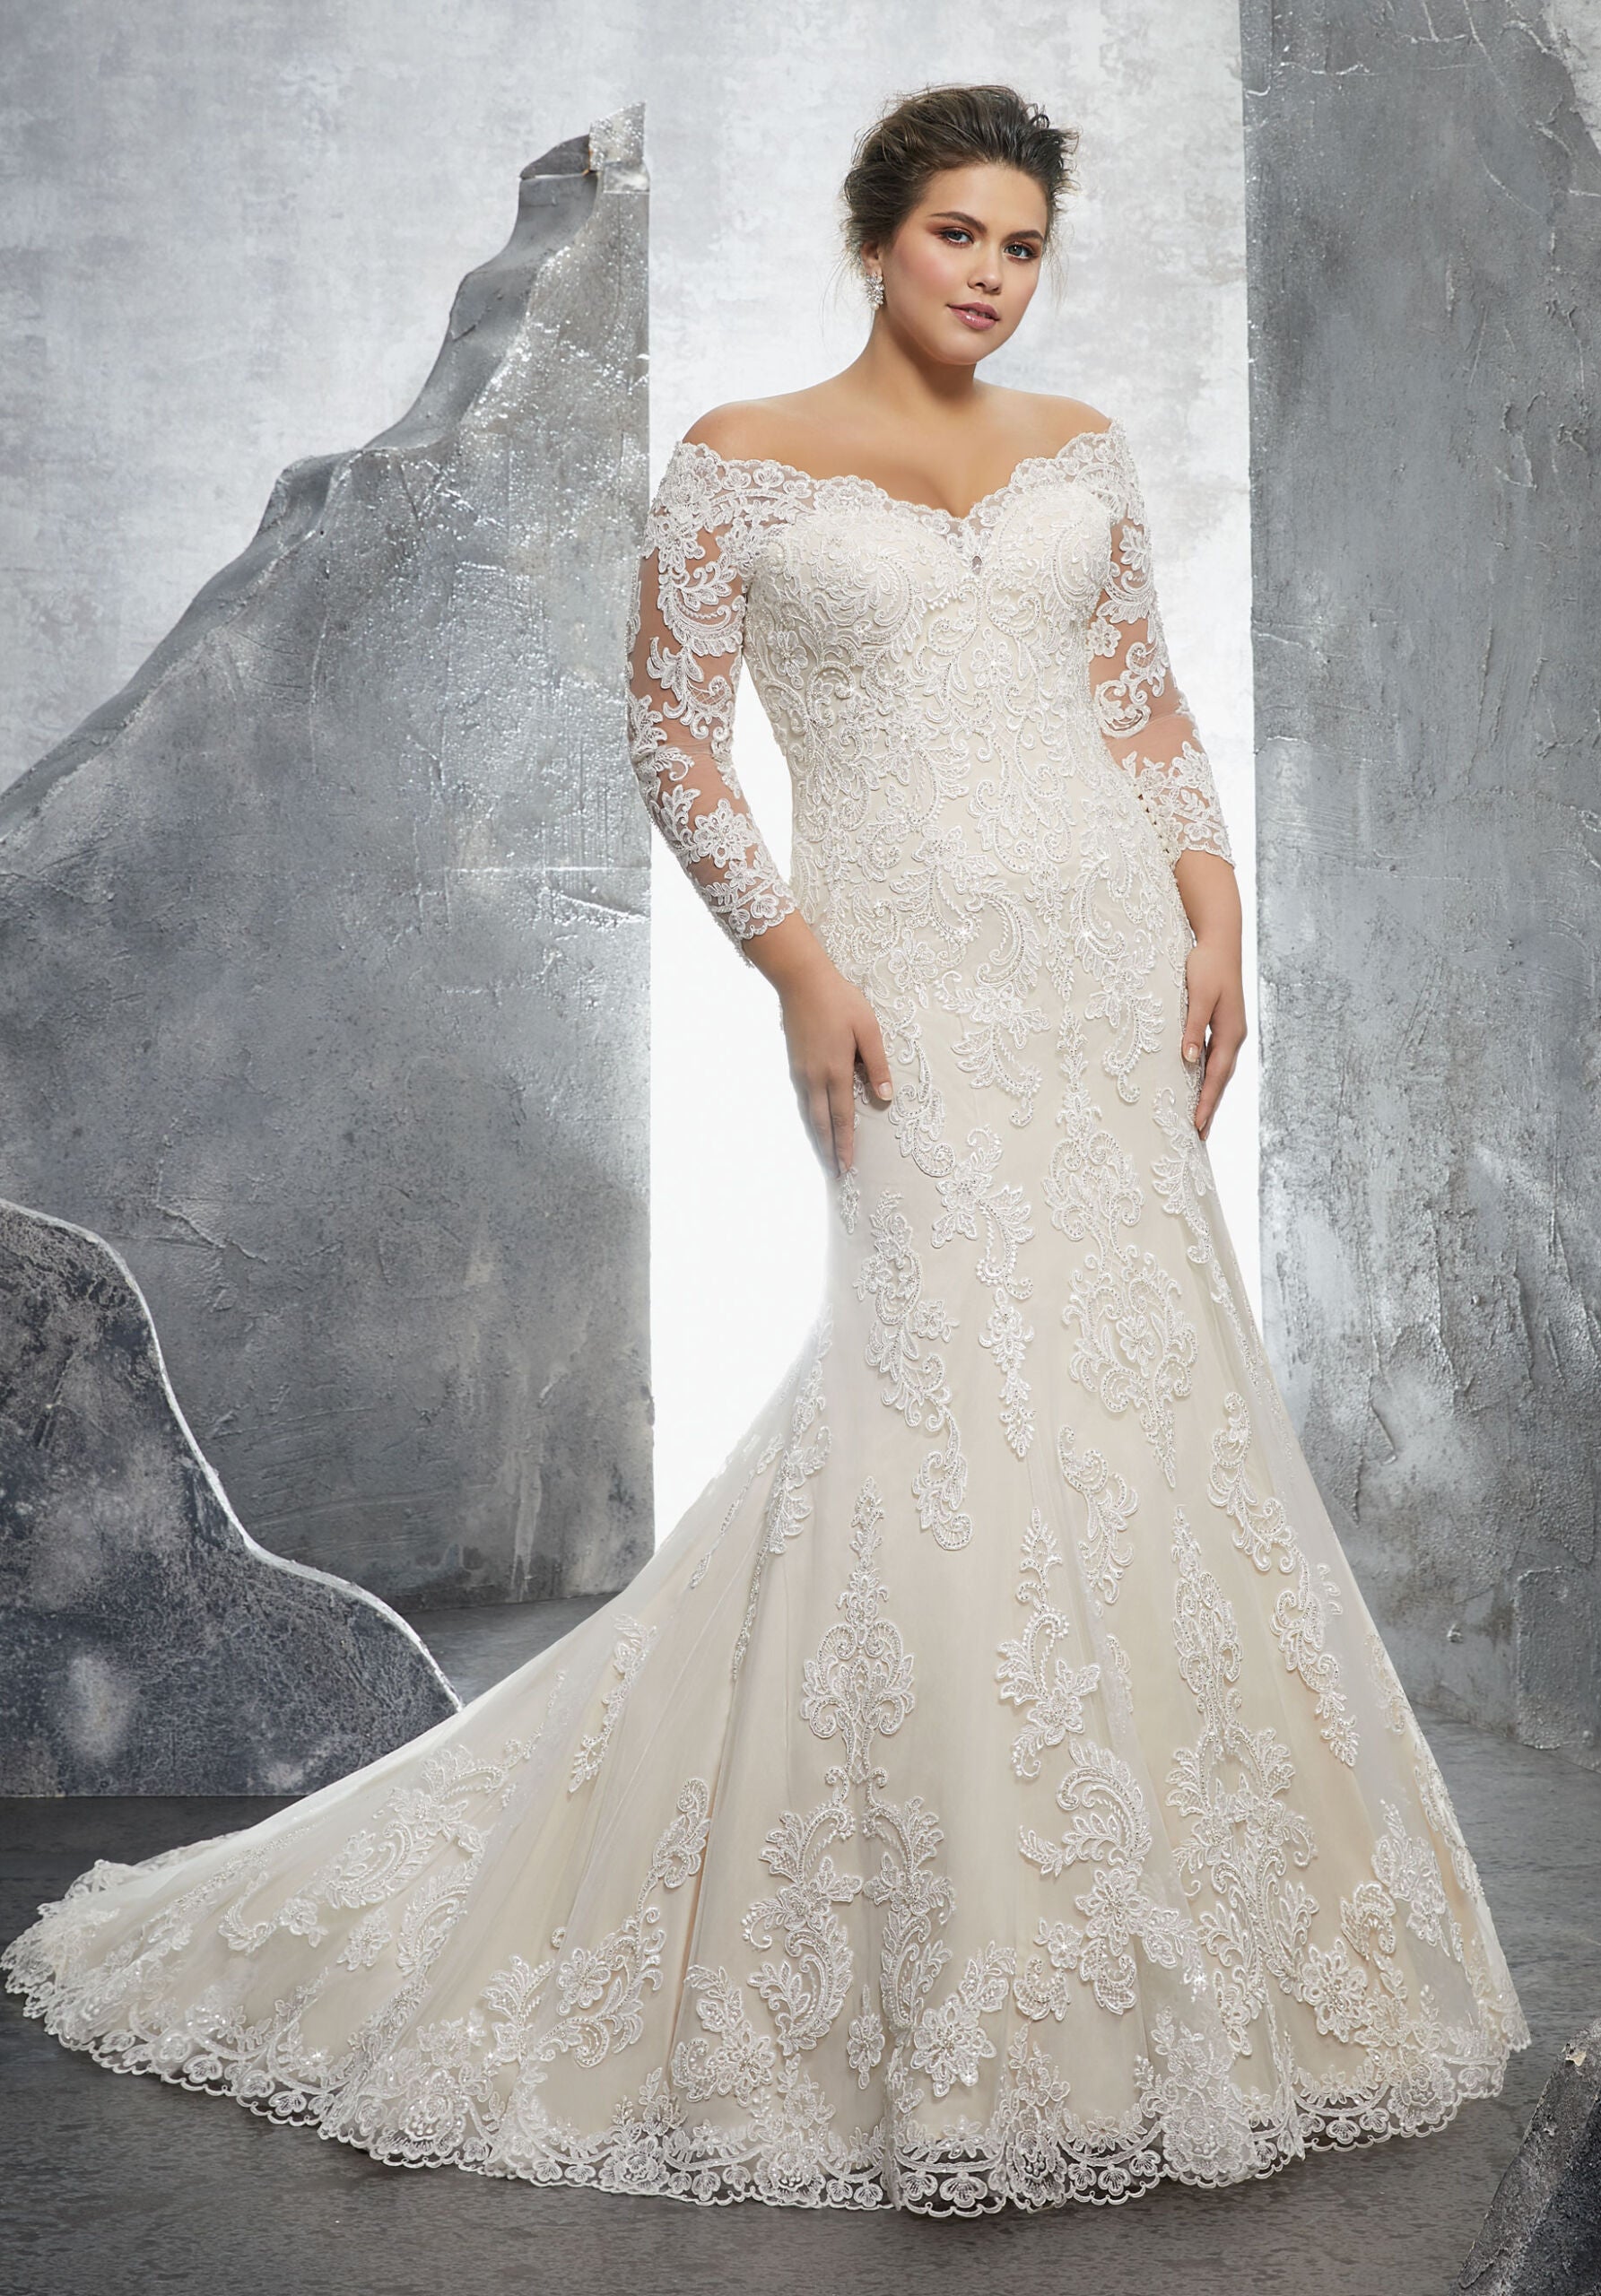 Plus size chiffon wedding dress with straps or sleeves and crystal